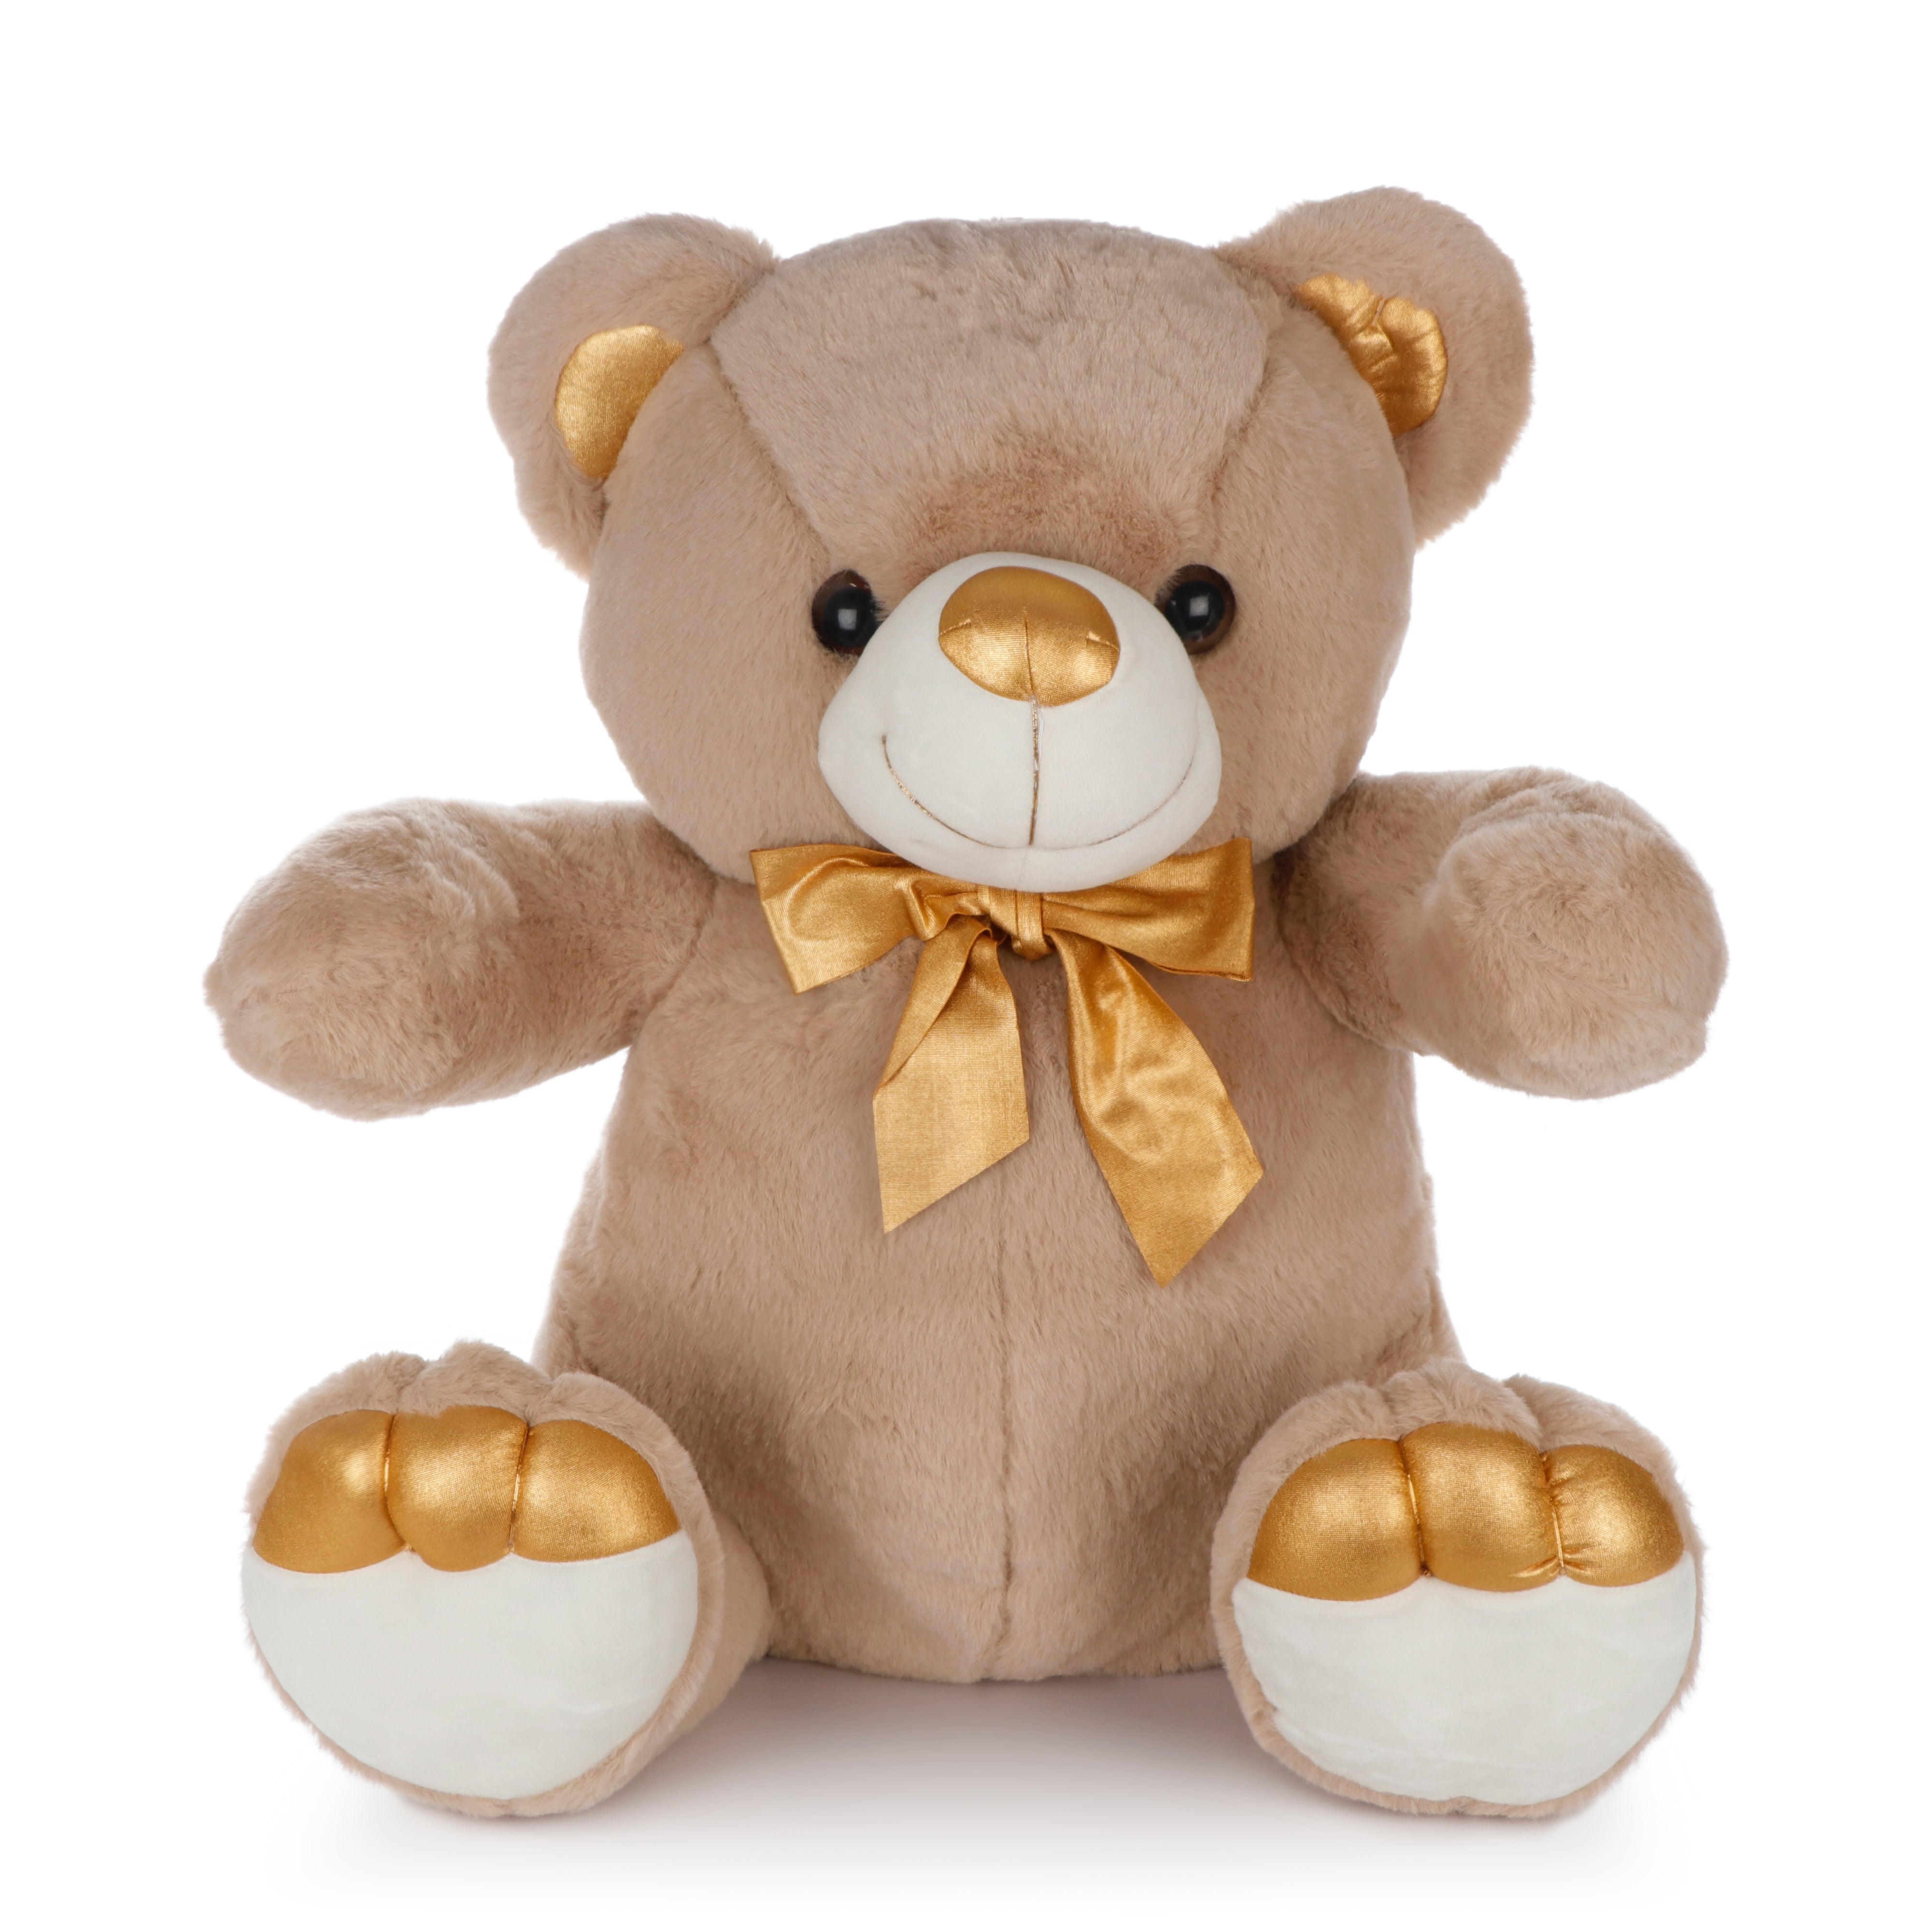 Archies | Archies Soft Toys, Teddy Bear For Girls, Soft Toys Boyfriend, Husband For Kids, Birthday Gift For Girls,Wife,   Brown Teddy Bear with Golden Paws - 50CM 0